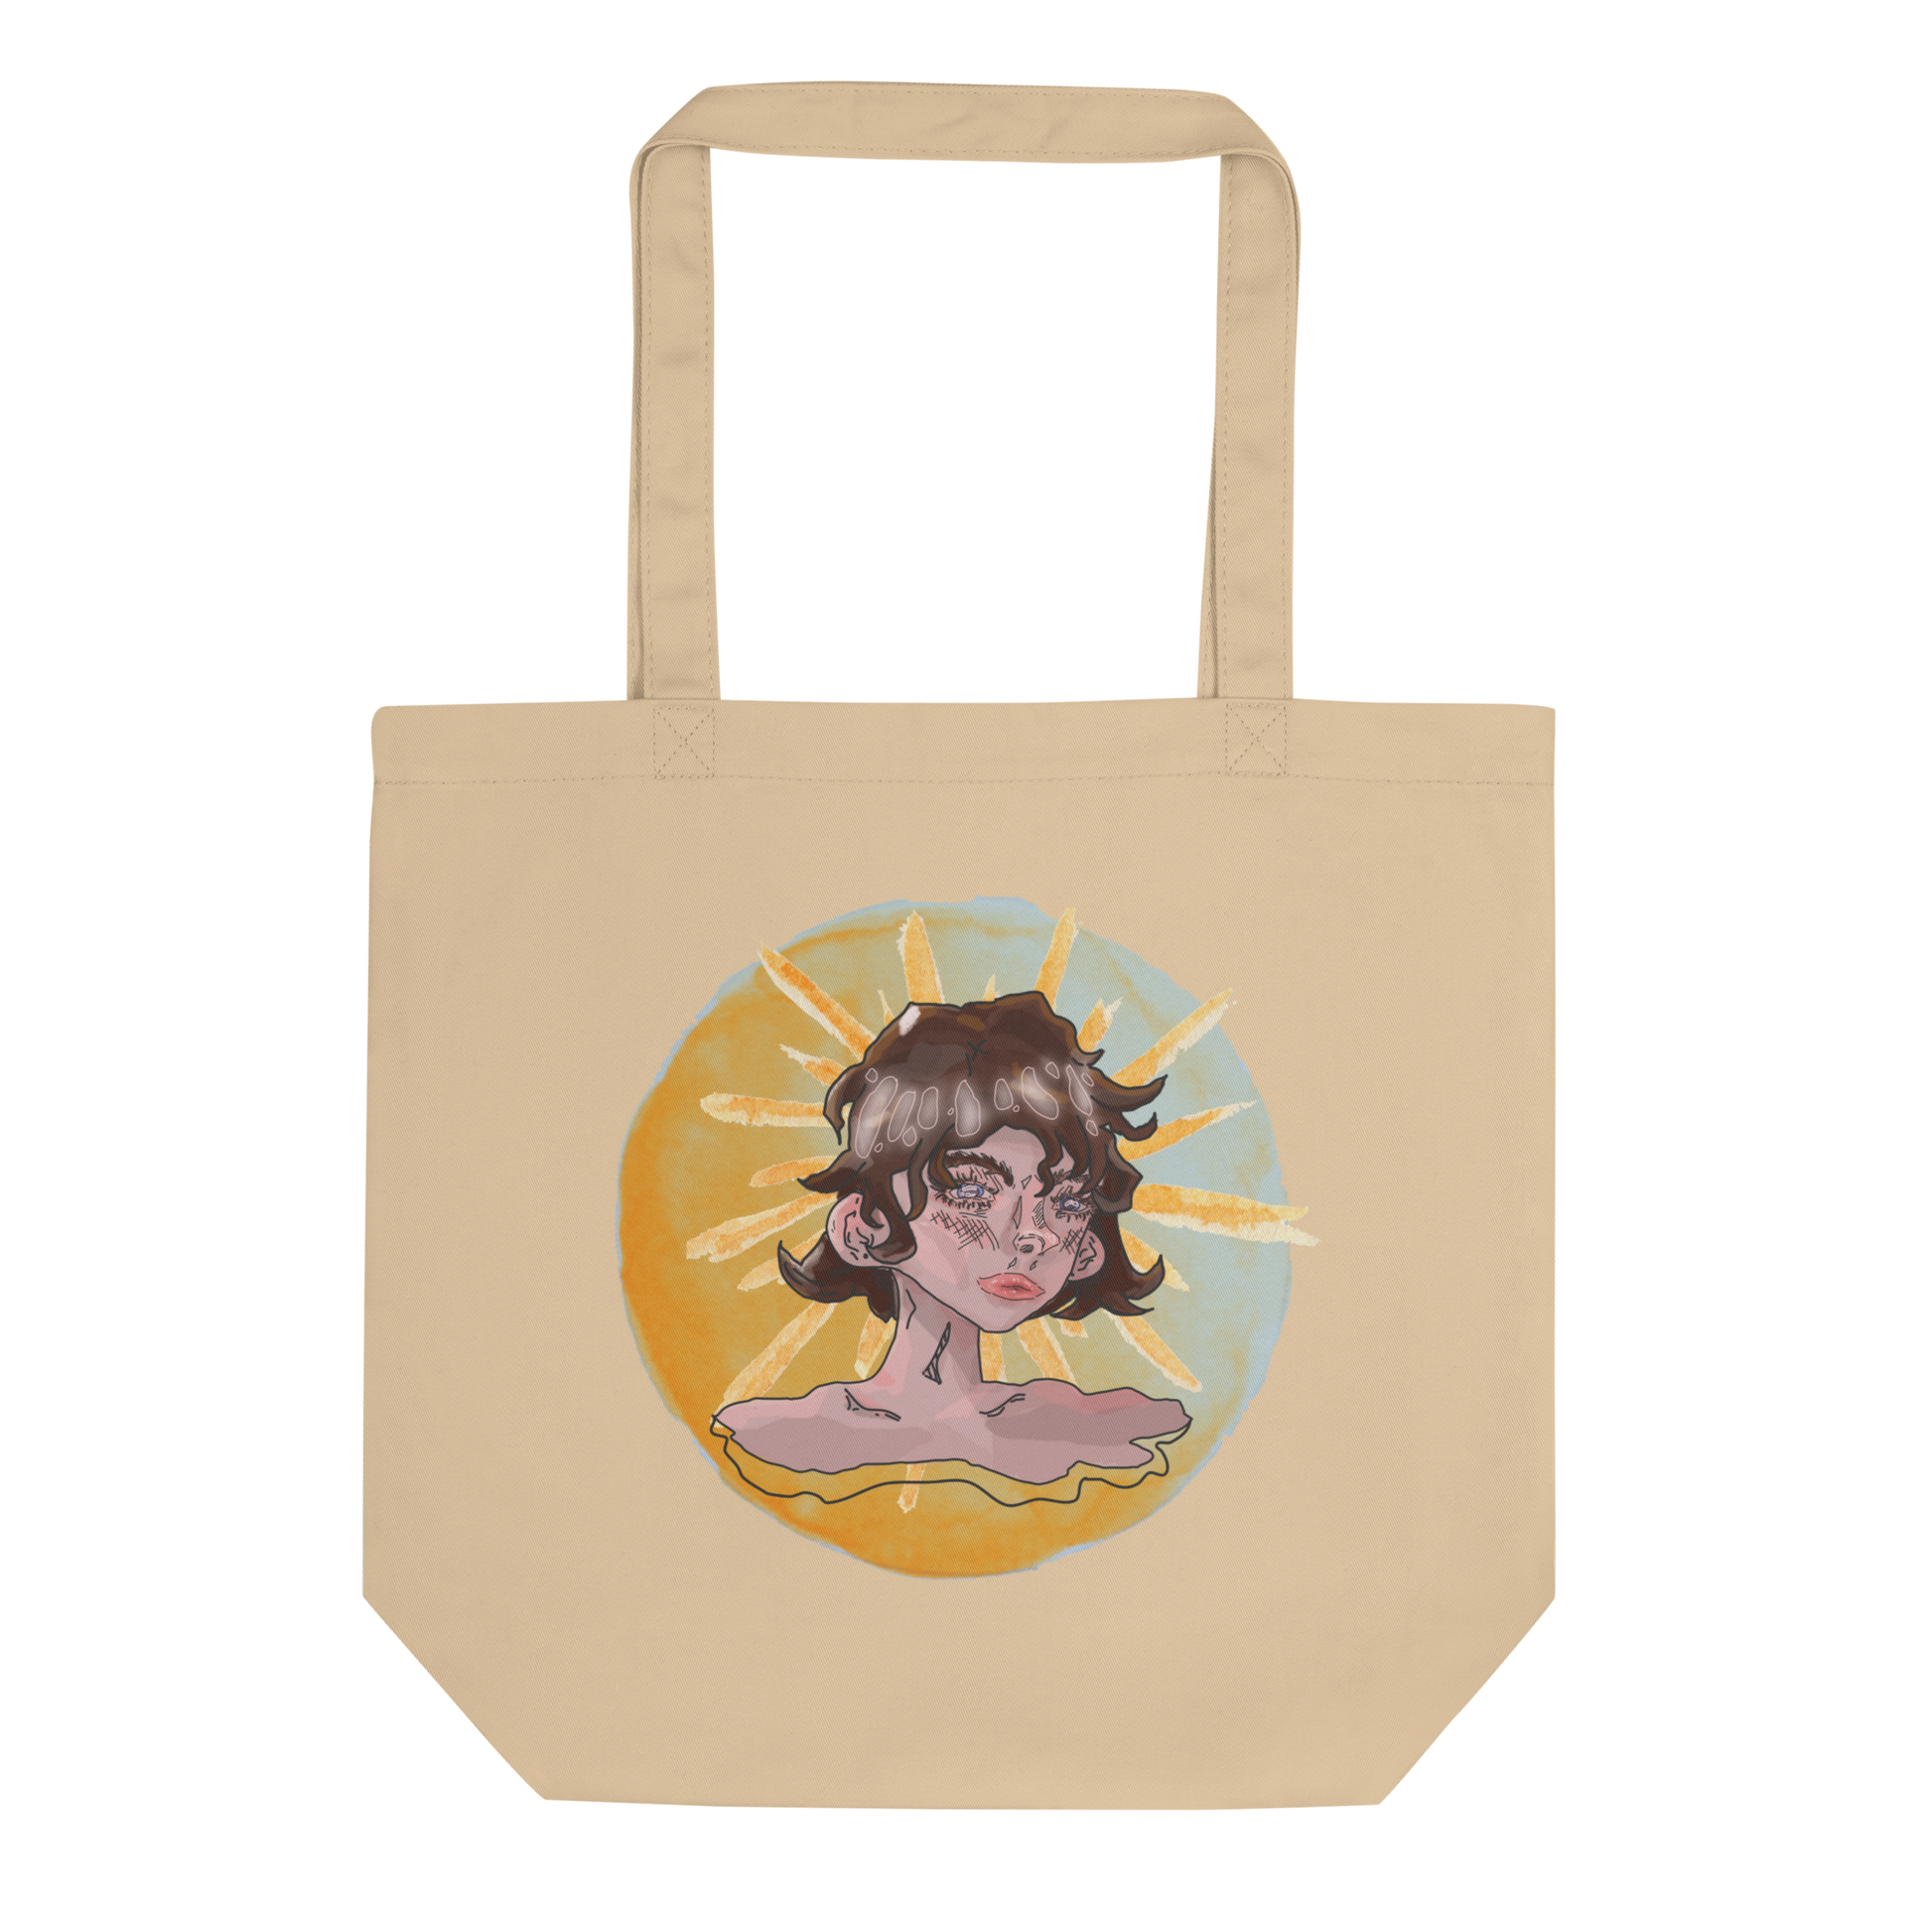 The 'Sunshine Girl' Tote in oyster color, presented in a lay-flat image, captures the charm of the girl's thoughtful portrait, a stylish and sustainable option for the imaginative and environmentally aware.